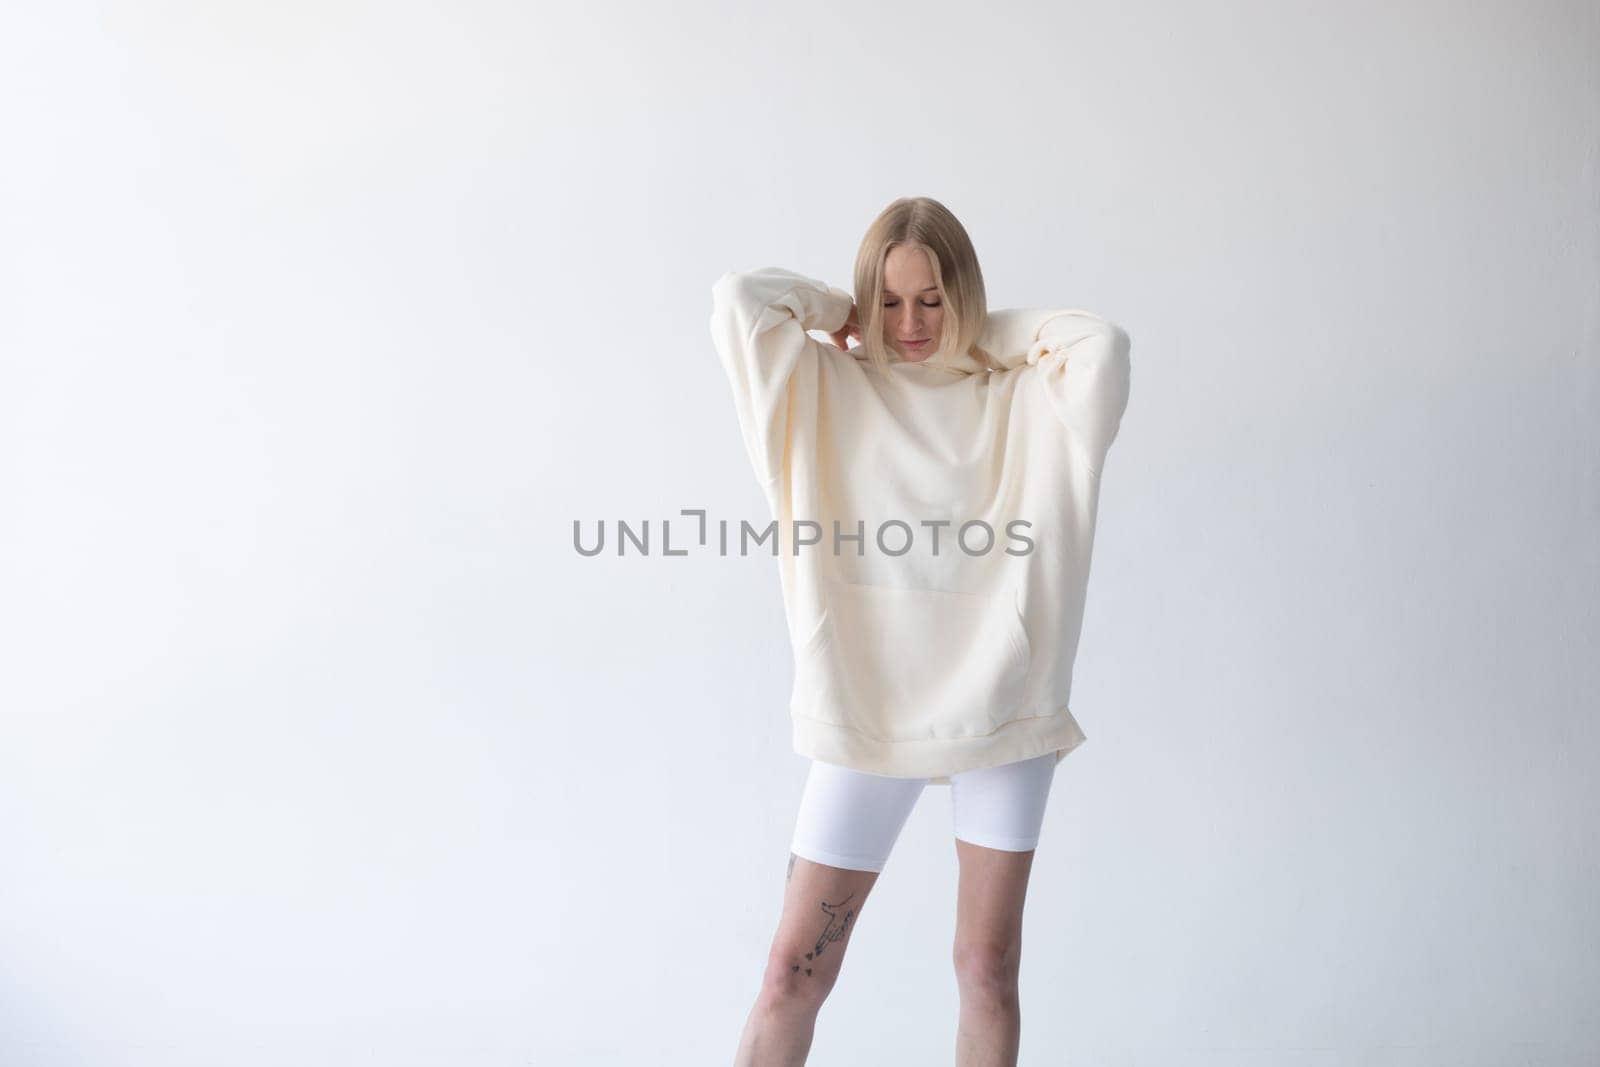 Beautiful blonde woman posing in white hoodie and leggings posing against white background. High quality photo